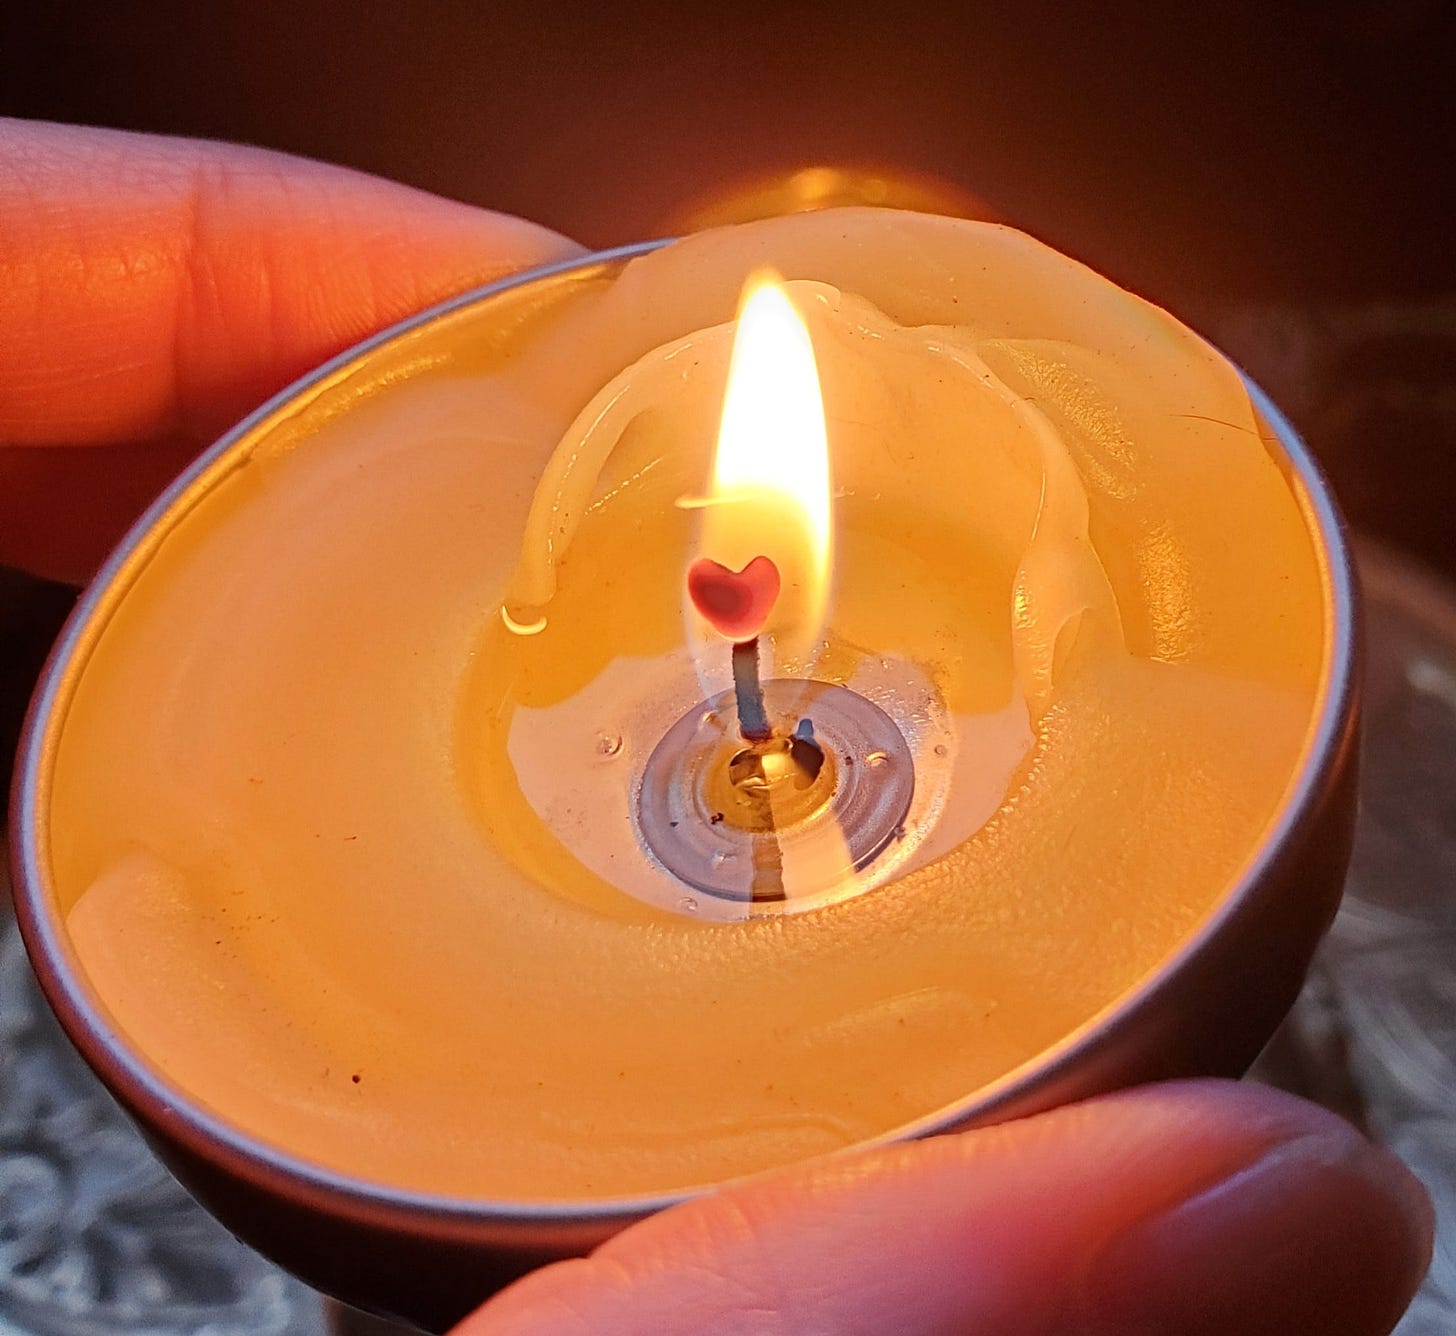 A close up of my hand holding a tiny, burning candle. In the center of the flame, the candle wick has formed the very definite shape of a heart.